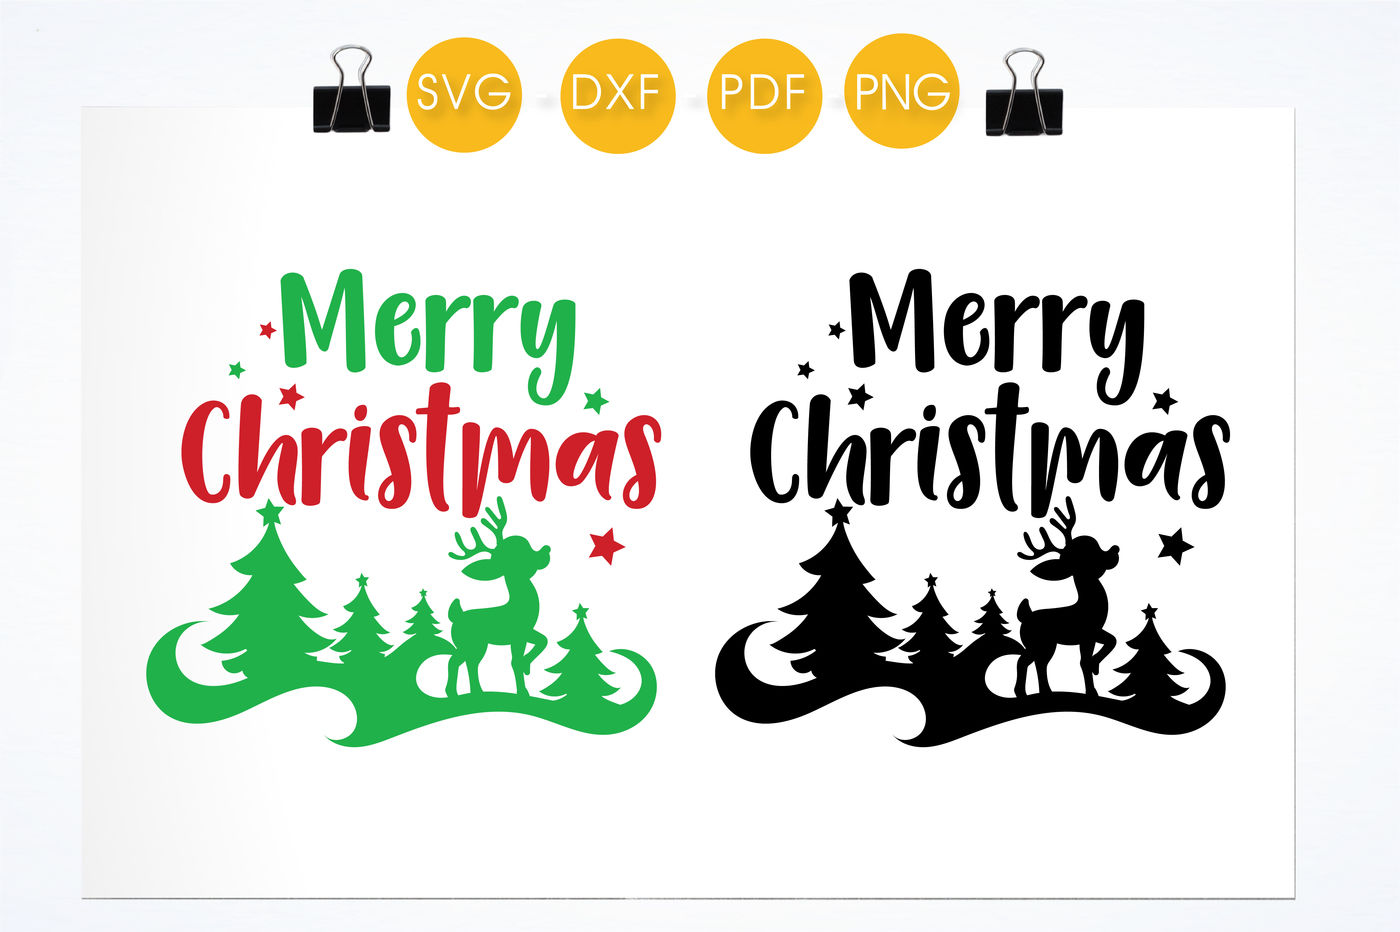 Merry Christmas SVG, PNG, EPS, DXF, cut file By PrettyCuttables